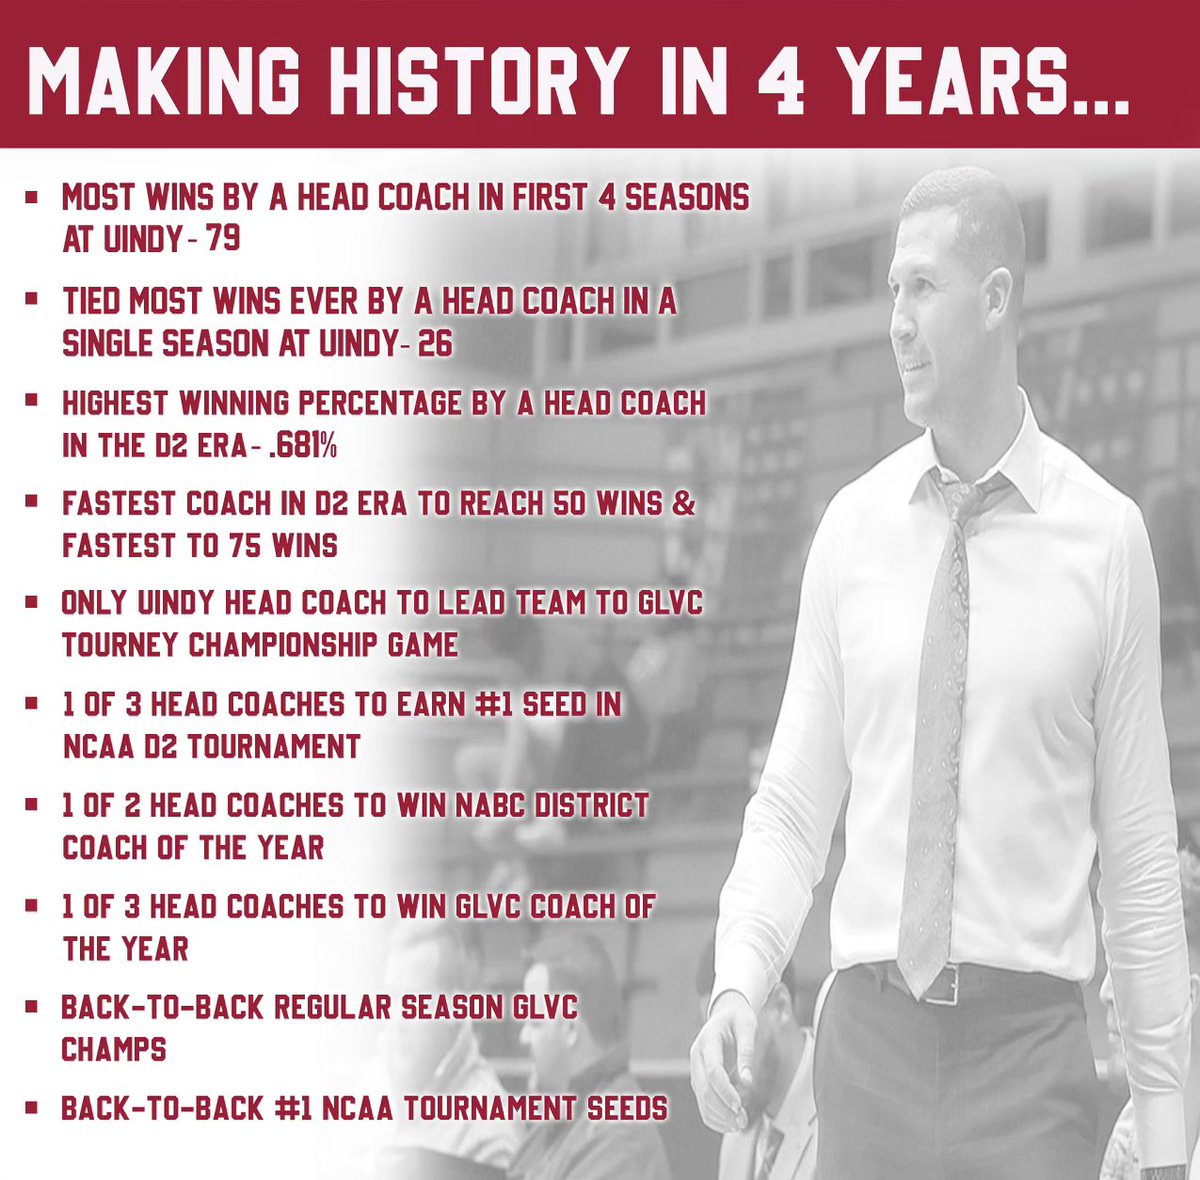 As our program embarks on a new era, it’s good to reflect on how incredible this past era was. Very proud of the past and also excited for the future. Go Hounds!